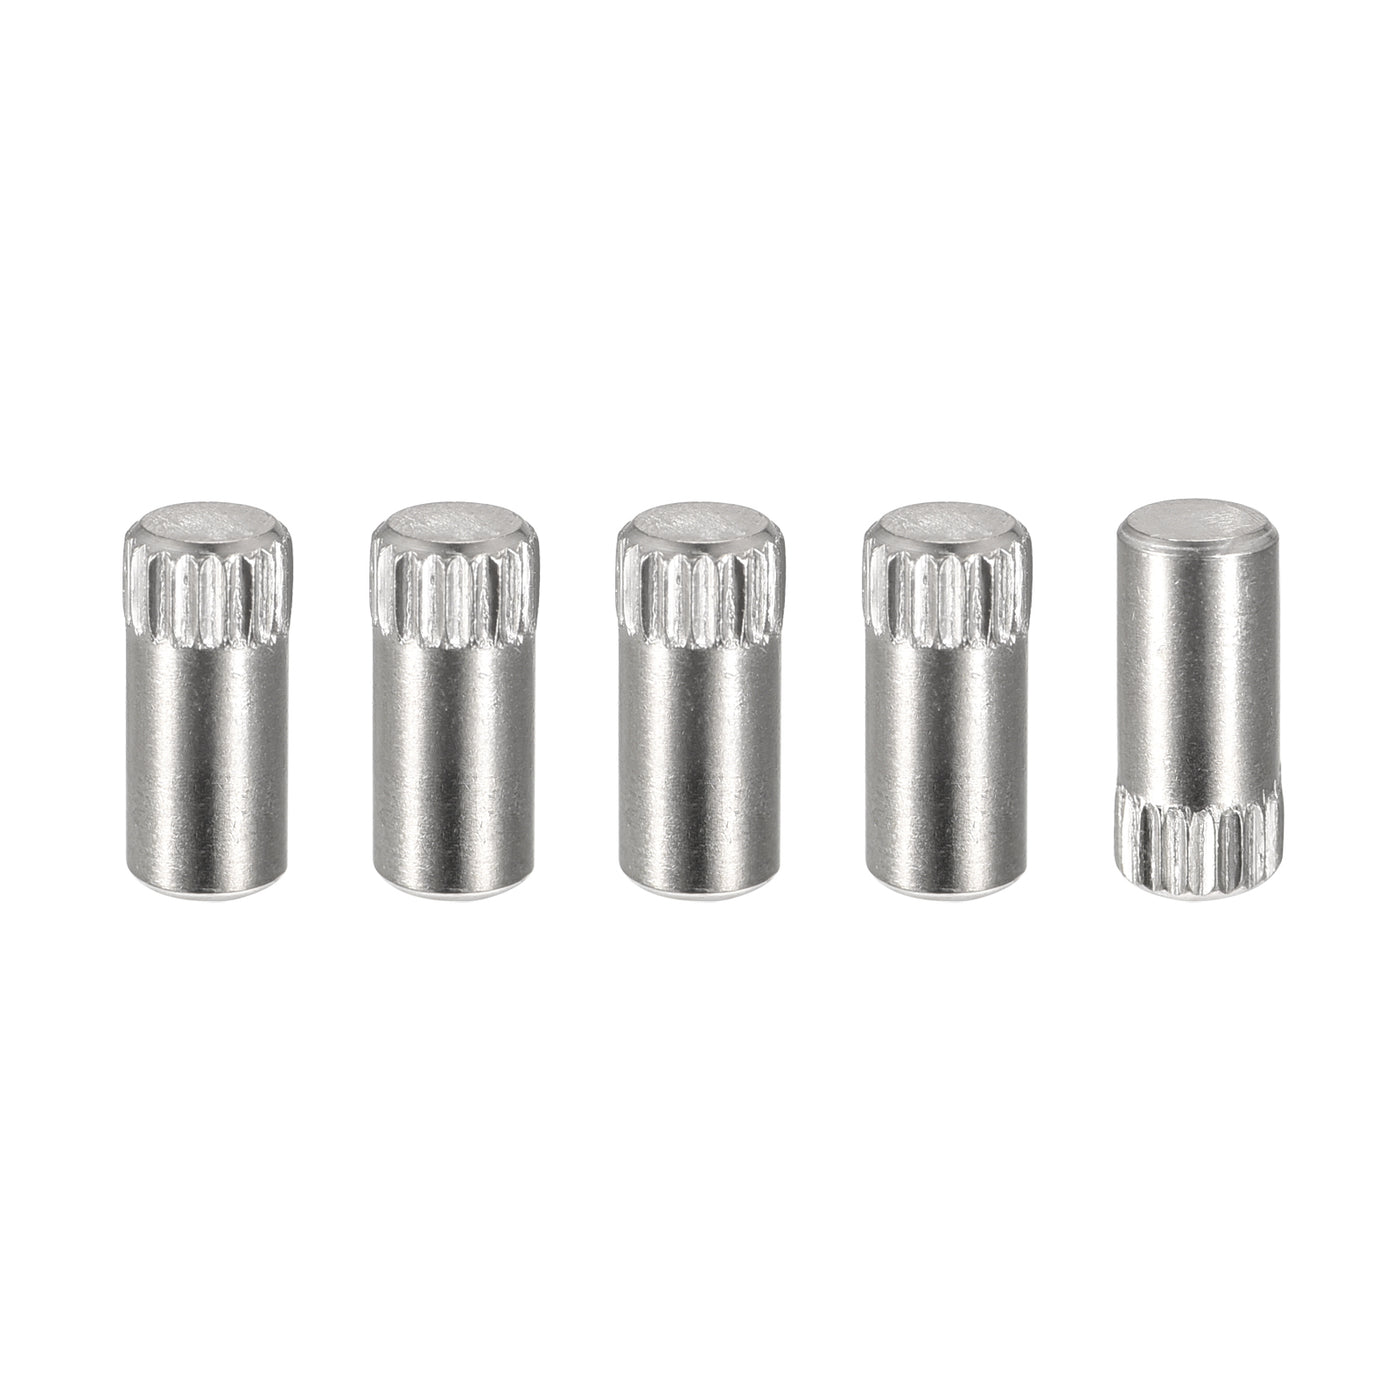 uxcell Uxcell 5x8mm 304 Stainless Steel Dowel Pins, 5Pcs Knurled Head Flat End Dowel Pin